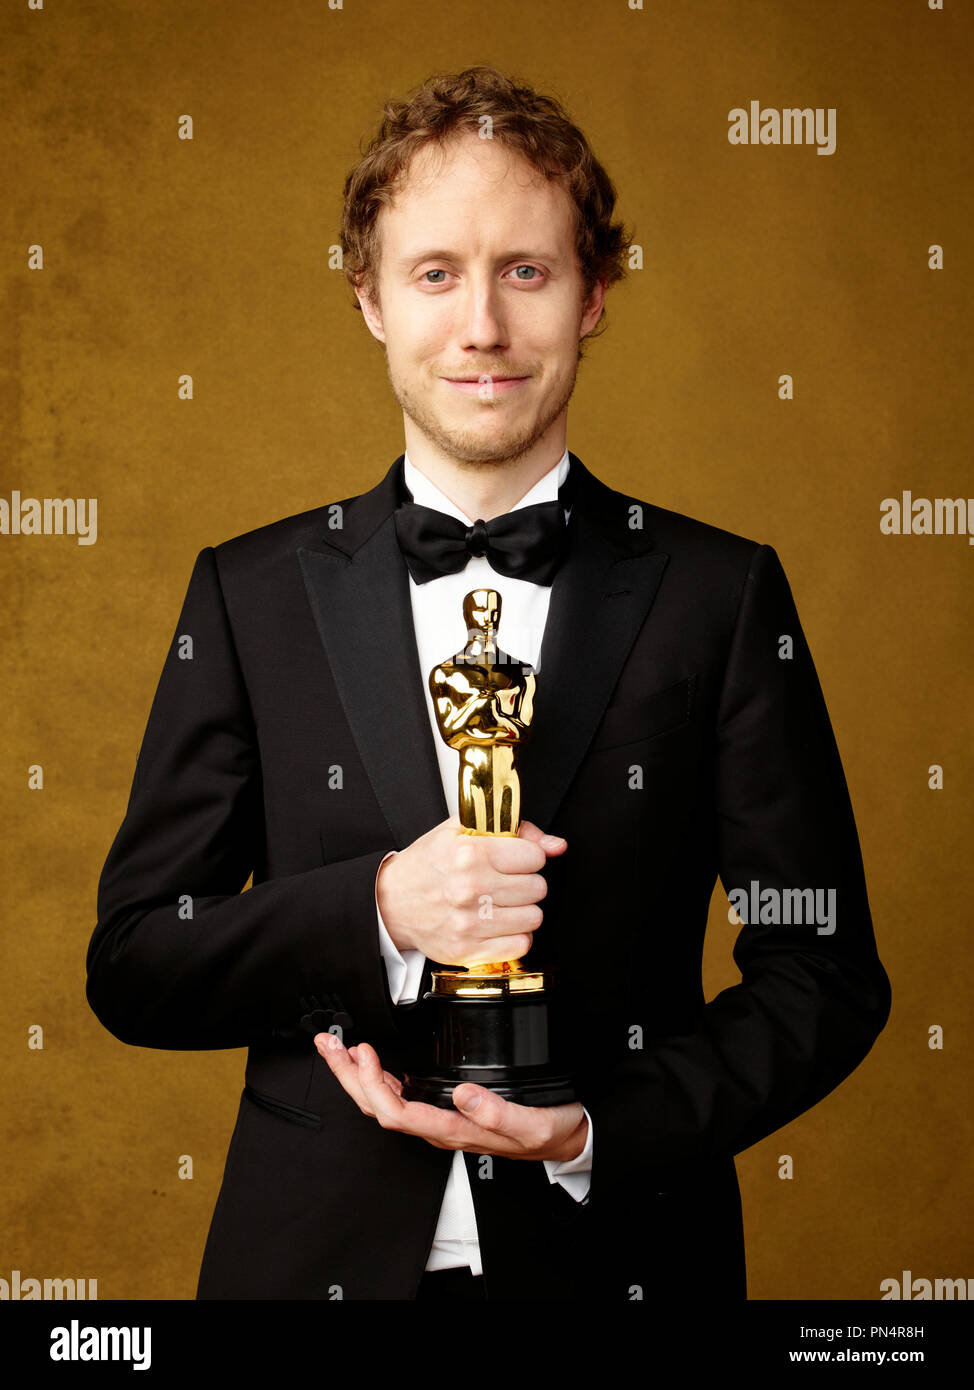 Foreign Language Film Award winner László Nemes, Son of Saul' at The 88th Oscars® in Hollywood, CA on Sunday, February 28, 2016.  File Reference # 32864 012THA  For Editorial Use Only -  All Rights Reserved Stock Photo